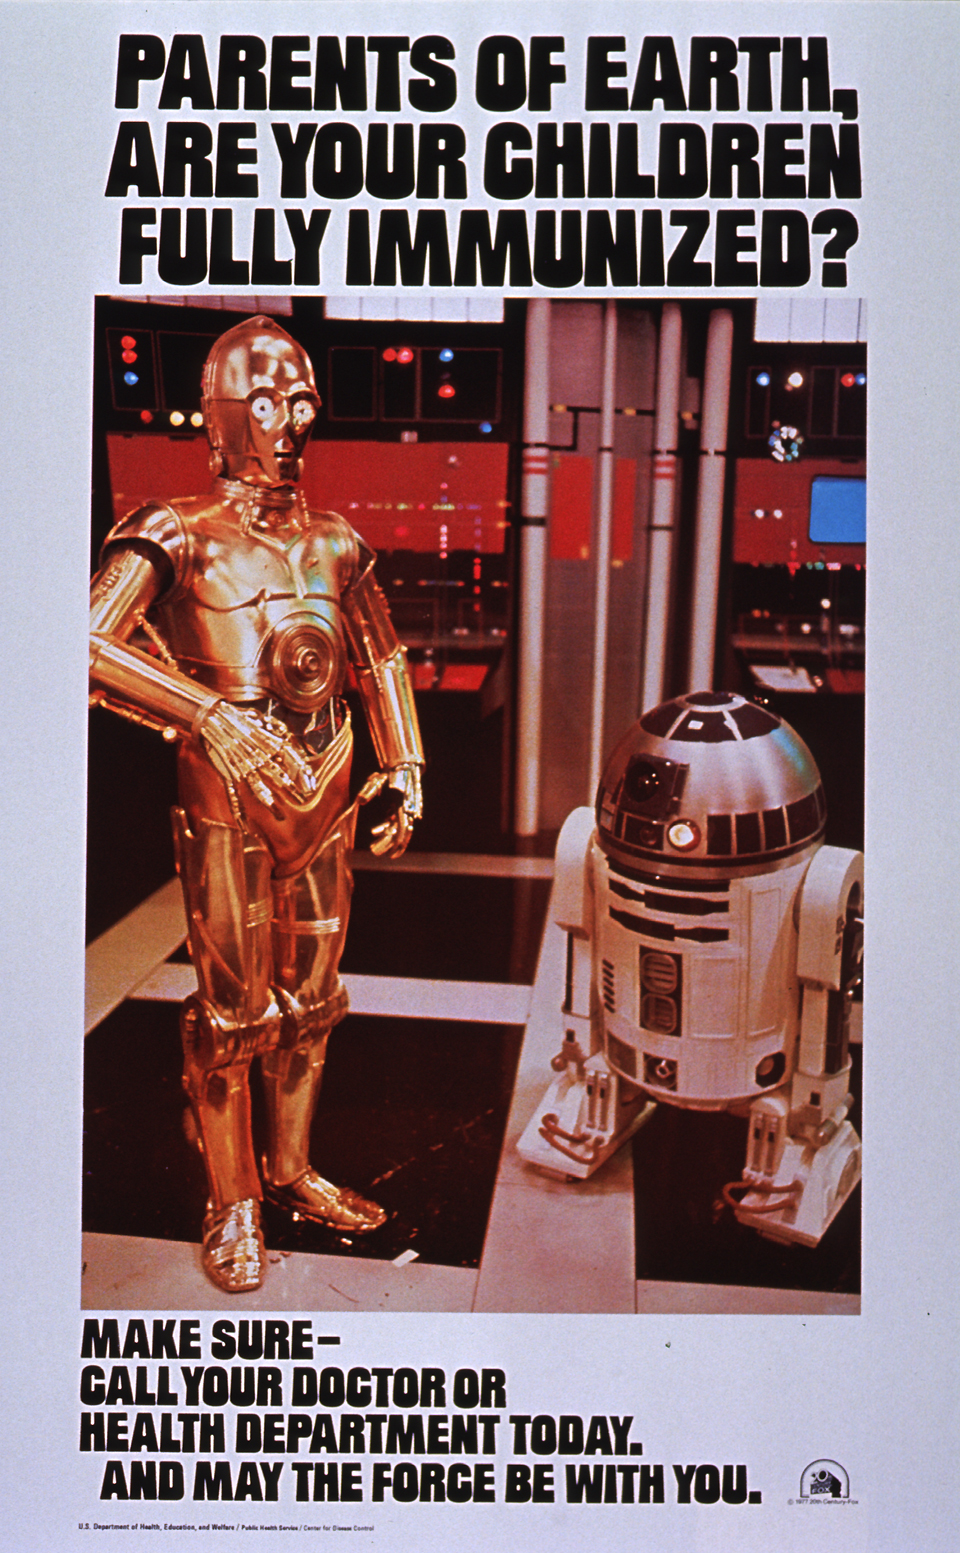 White poster with black lettering and color photo image. Image shows R2-D2 and C3PO, robotic characters from the film Star Wars, standing and surrounded by monitors and flashing equipment. Logo for 20th Century Fox in lower right corner of poster.